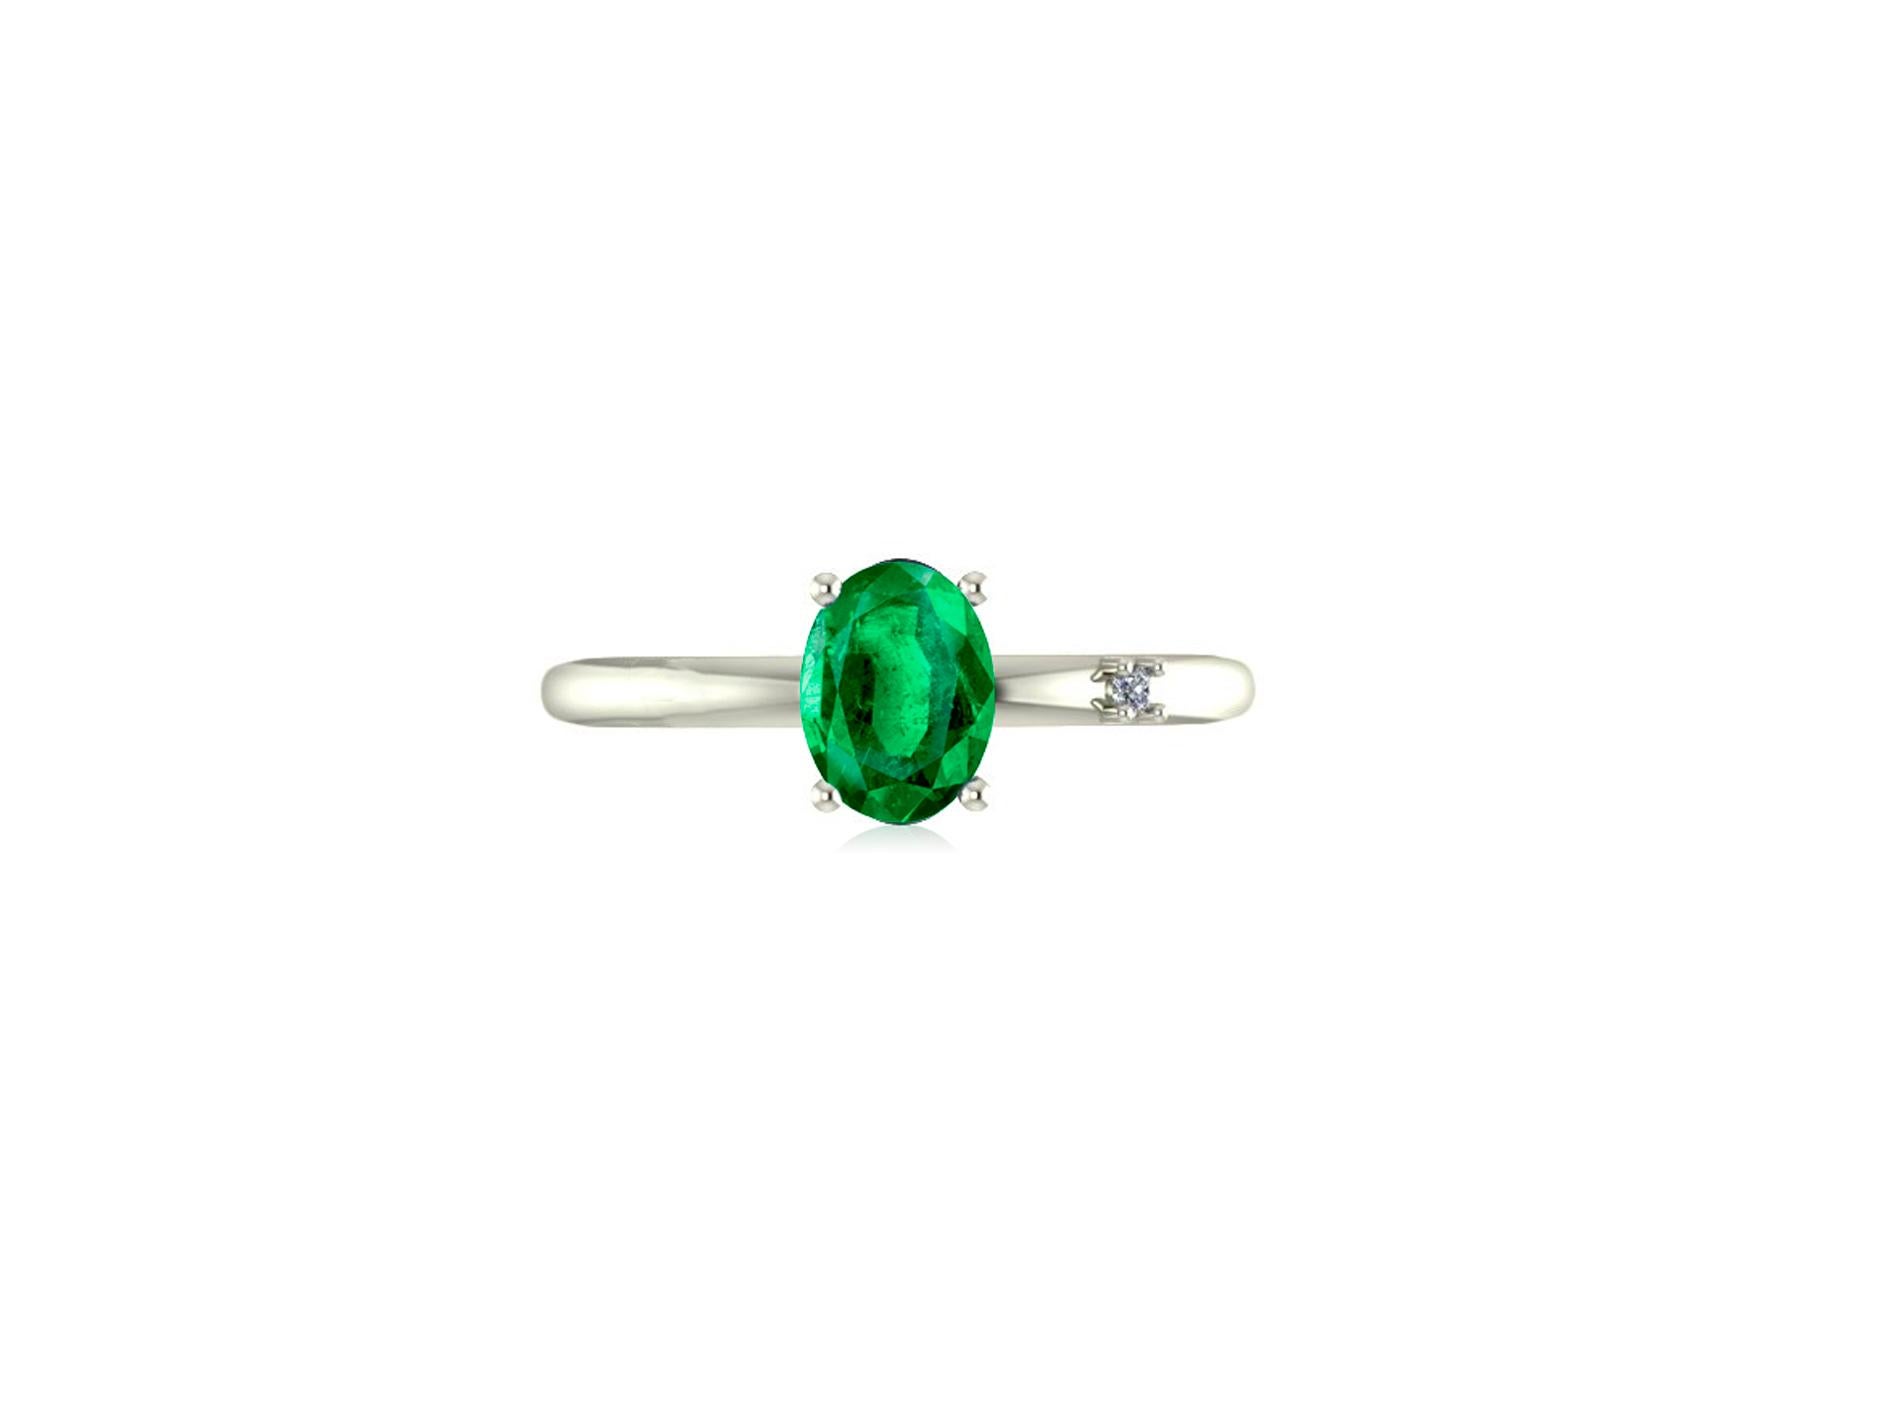 For Sale:  Emerald and diamond 14k gold ring. Minimalist emerald ring 7